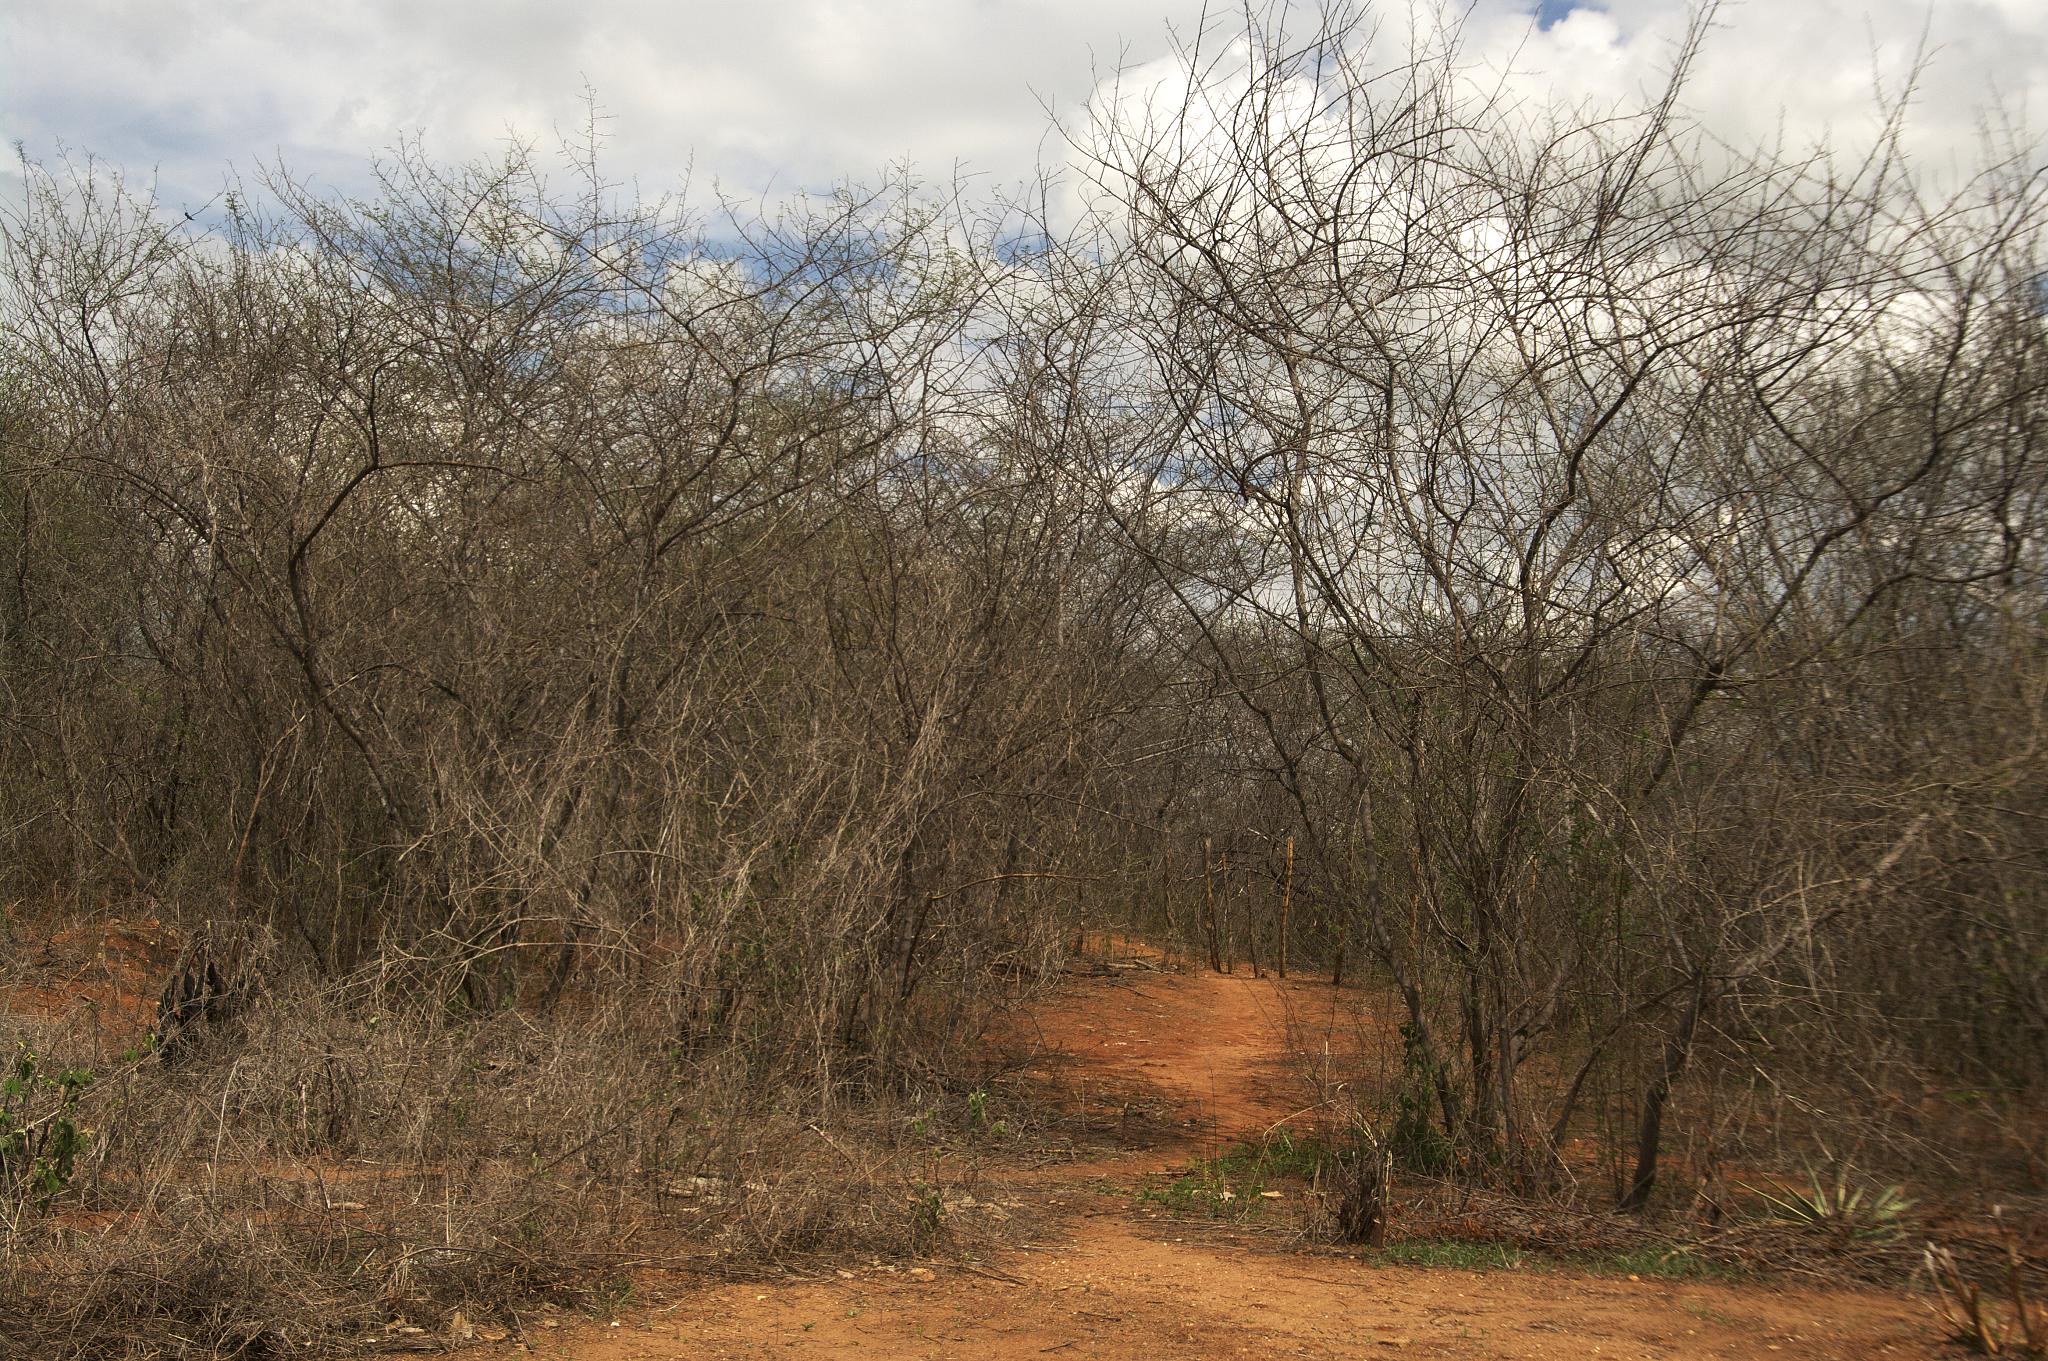 a dirt road in a wooded area, surrounded by brush